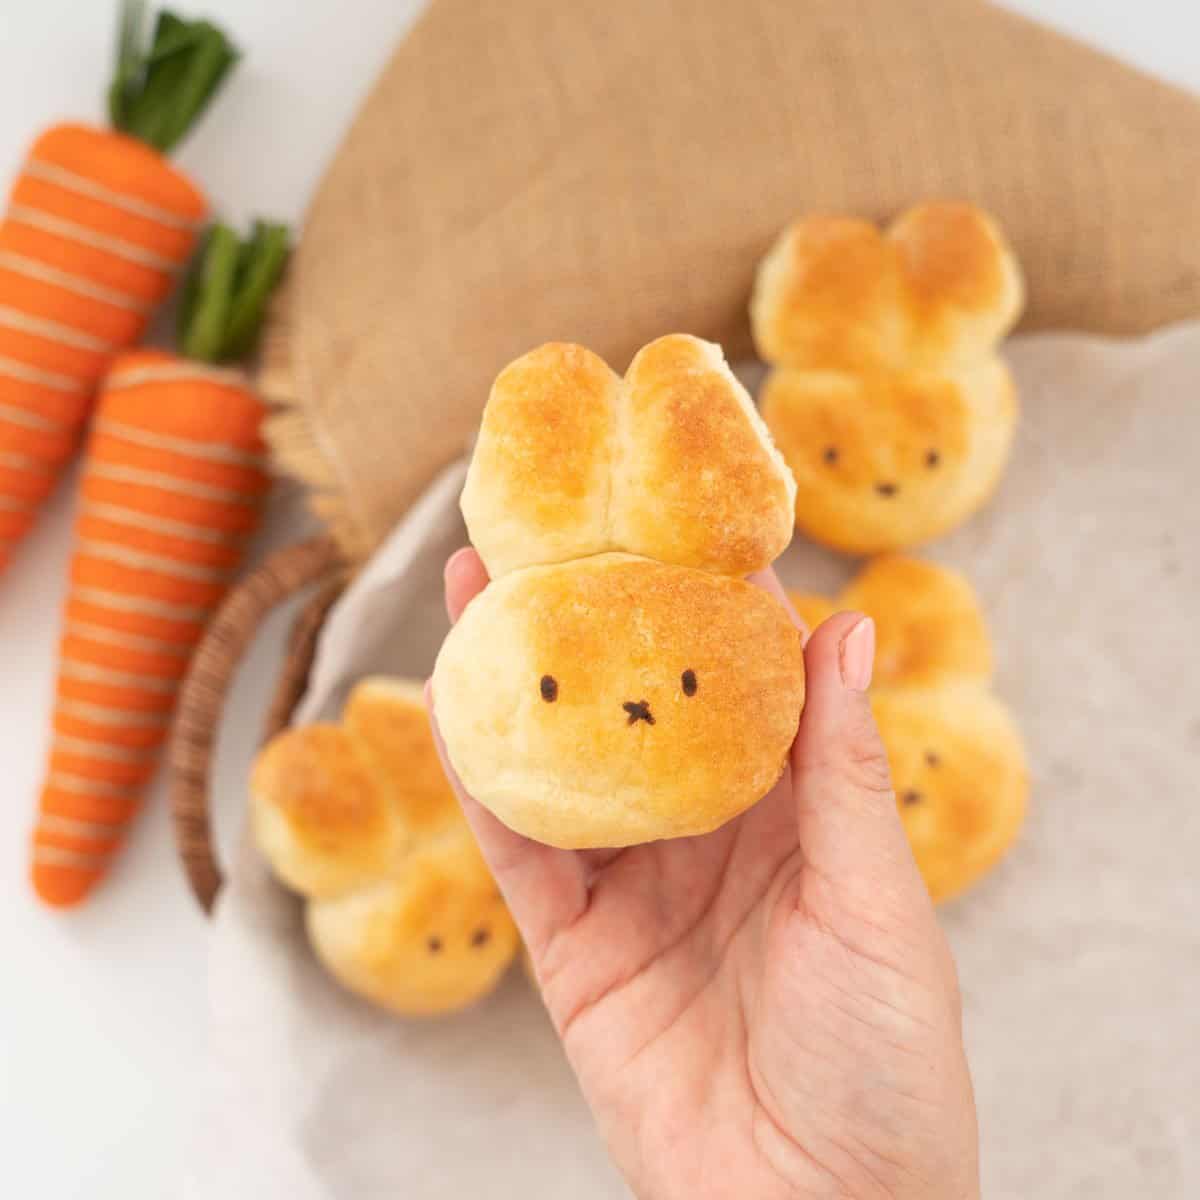 A bread roll baked into the shape of a bunny face with 2 ears.